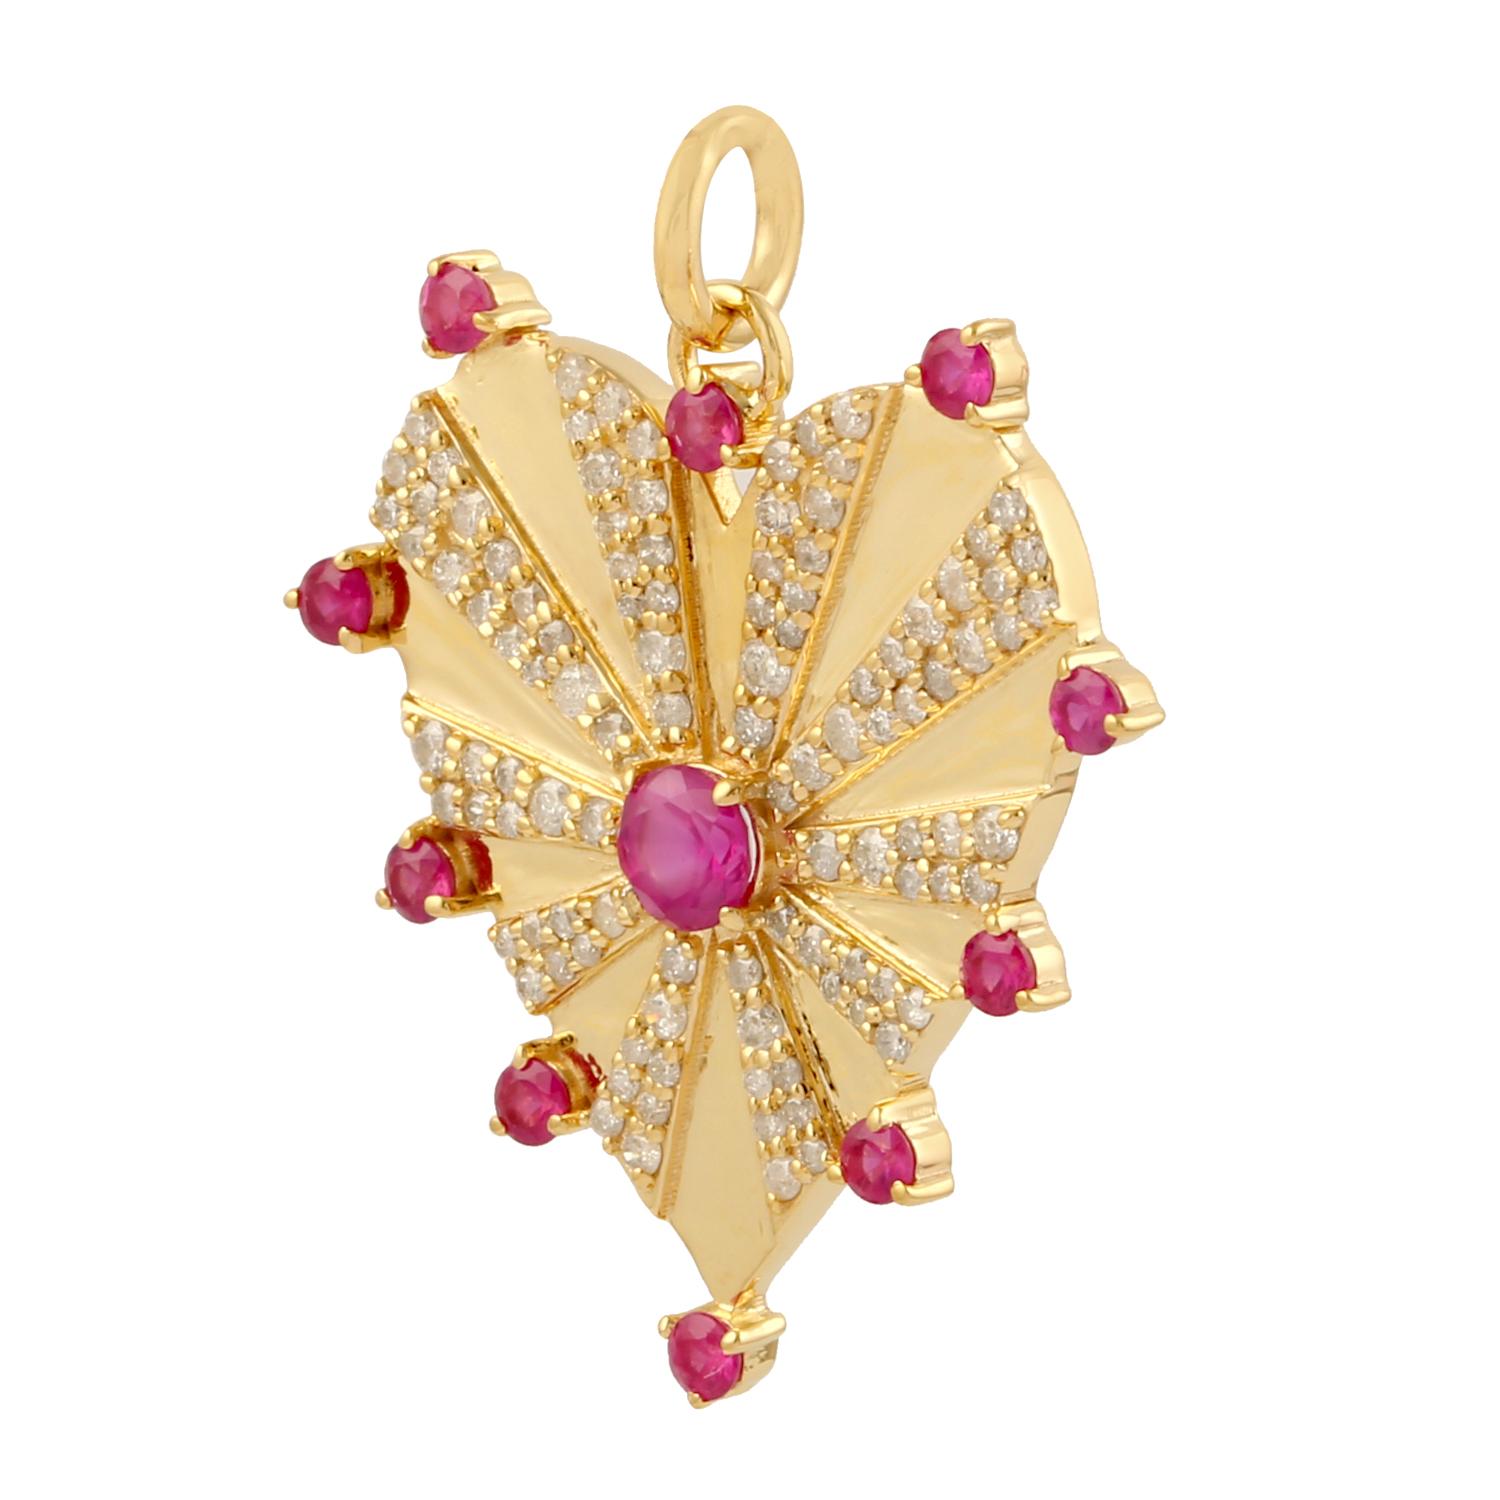 The 14 karat gold pendant is hand set with .99 carats ruby and .73 carats of sparkling diamonds. 

FOLLOW MEGHNA JEWELS storefront to view the latest collection & exclusive pieces. Meghna Jewels is proudly rated as a Top Seller on 1stdibs with 5